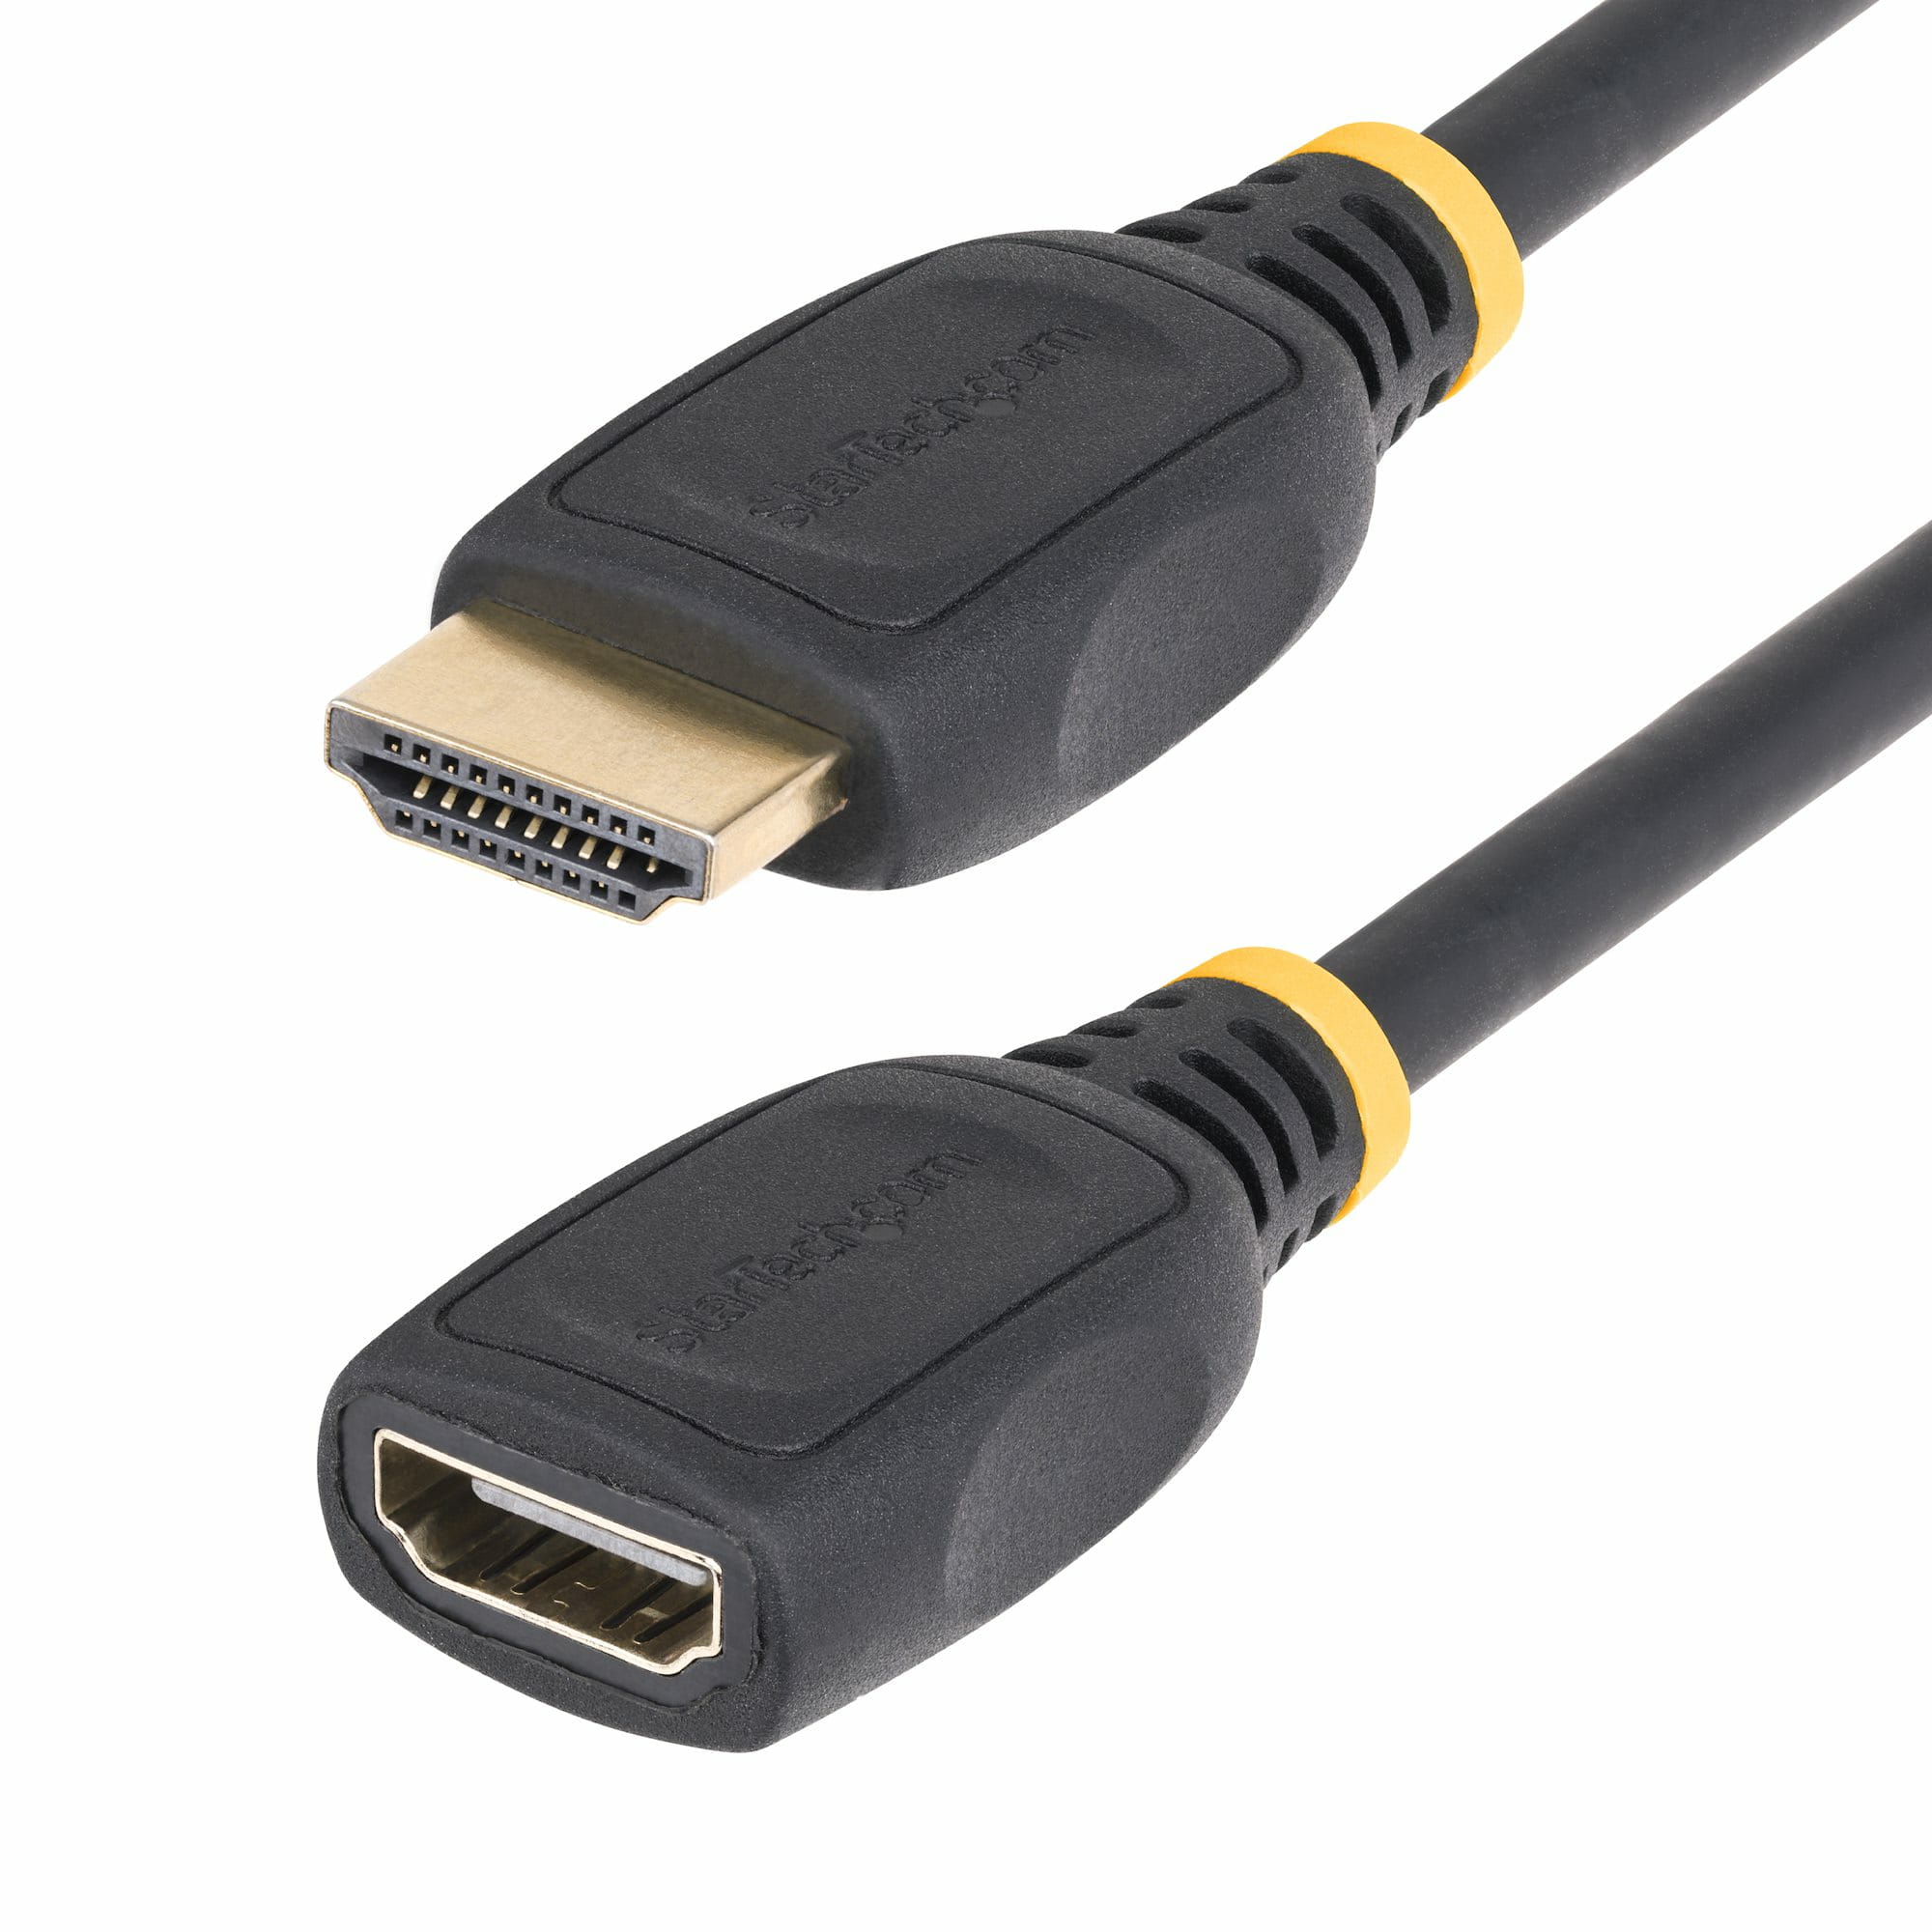 StarTech.com 18in HDMI 2.0 Extension Cable, 4K 60Hz, M/F